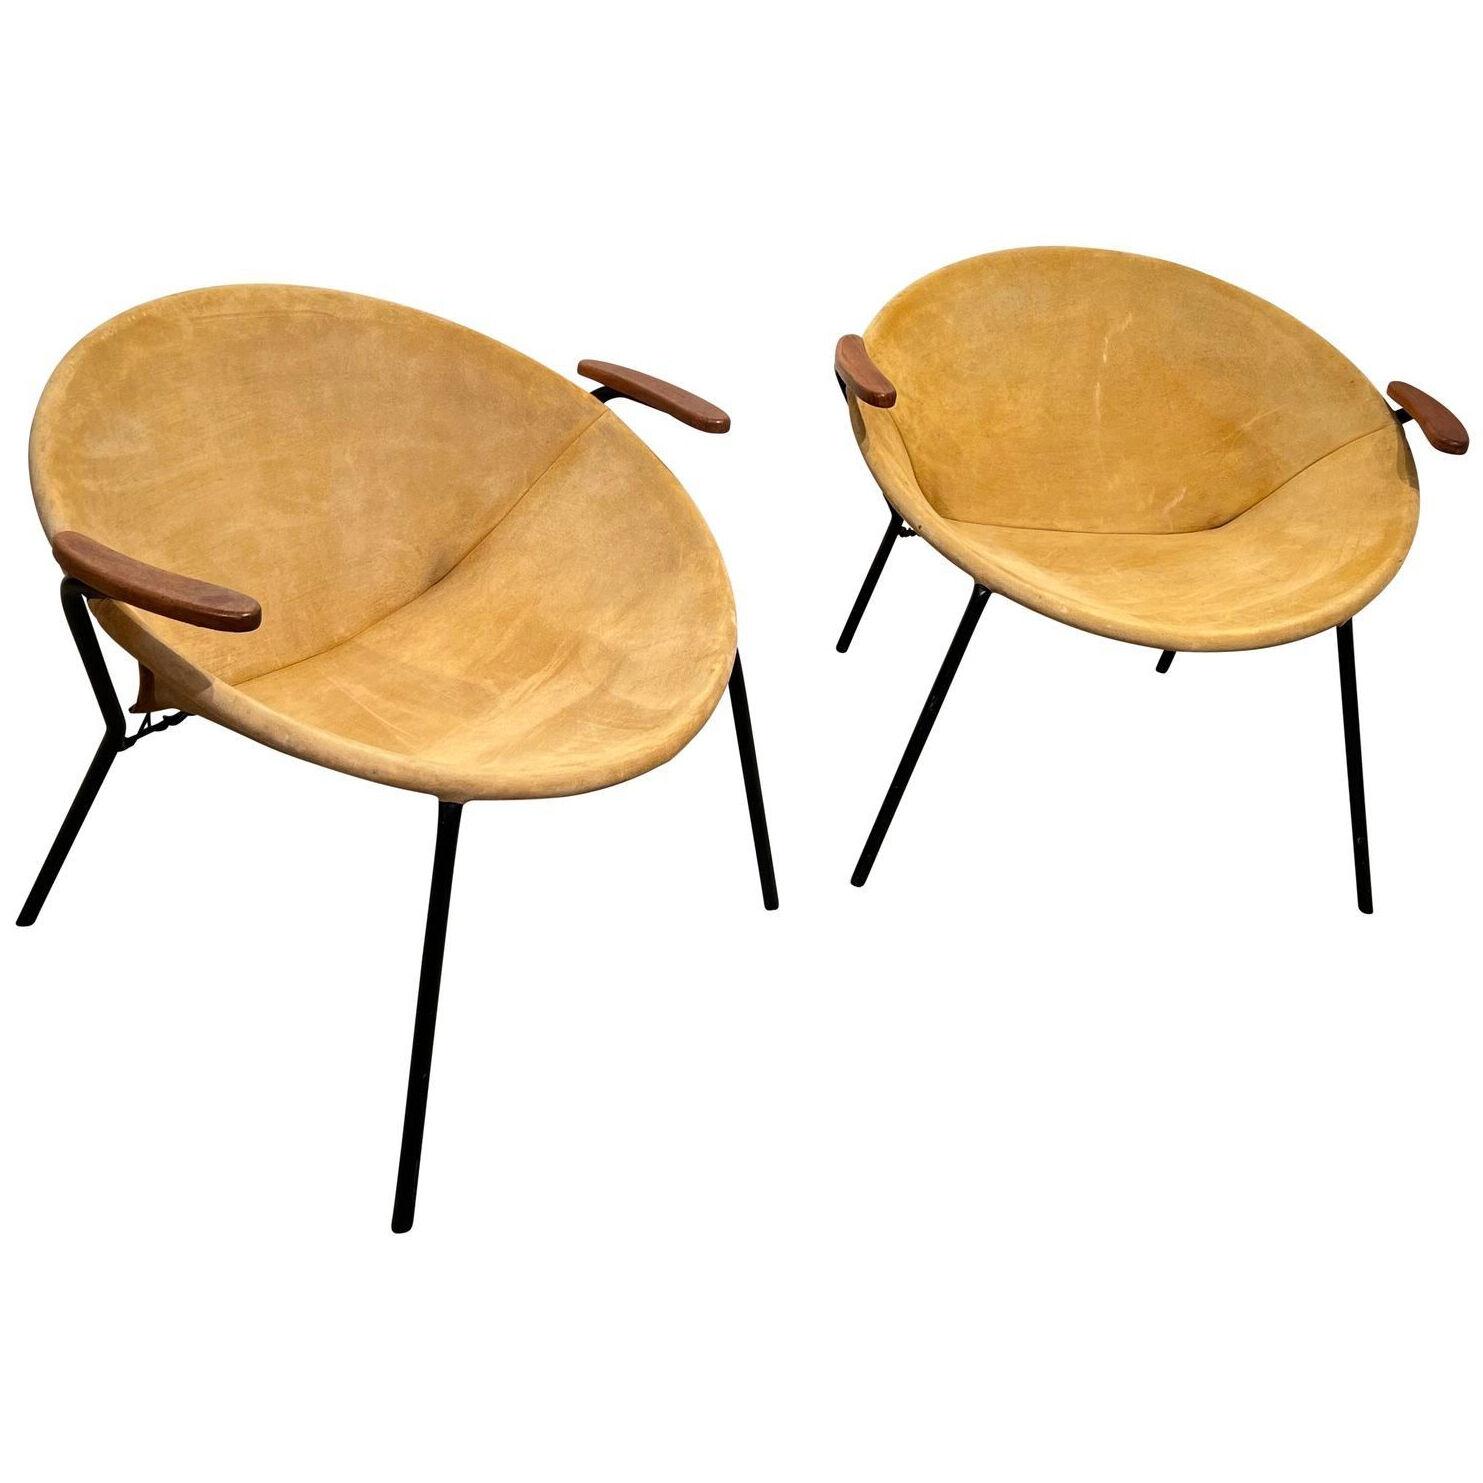 Pair of ‚Balloon’ lounge chairs by Hans Olsen, Yellow Suede, Denmark circa 1960